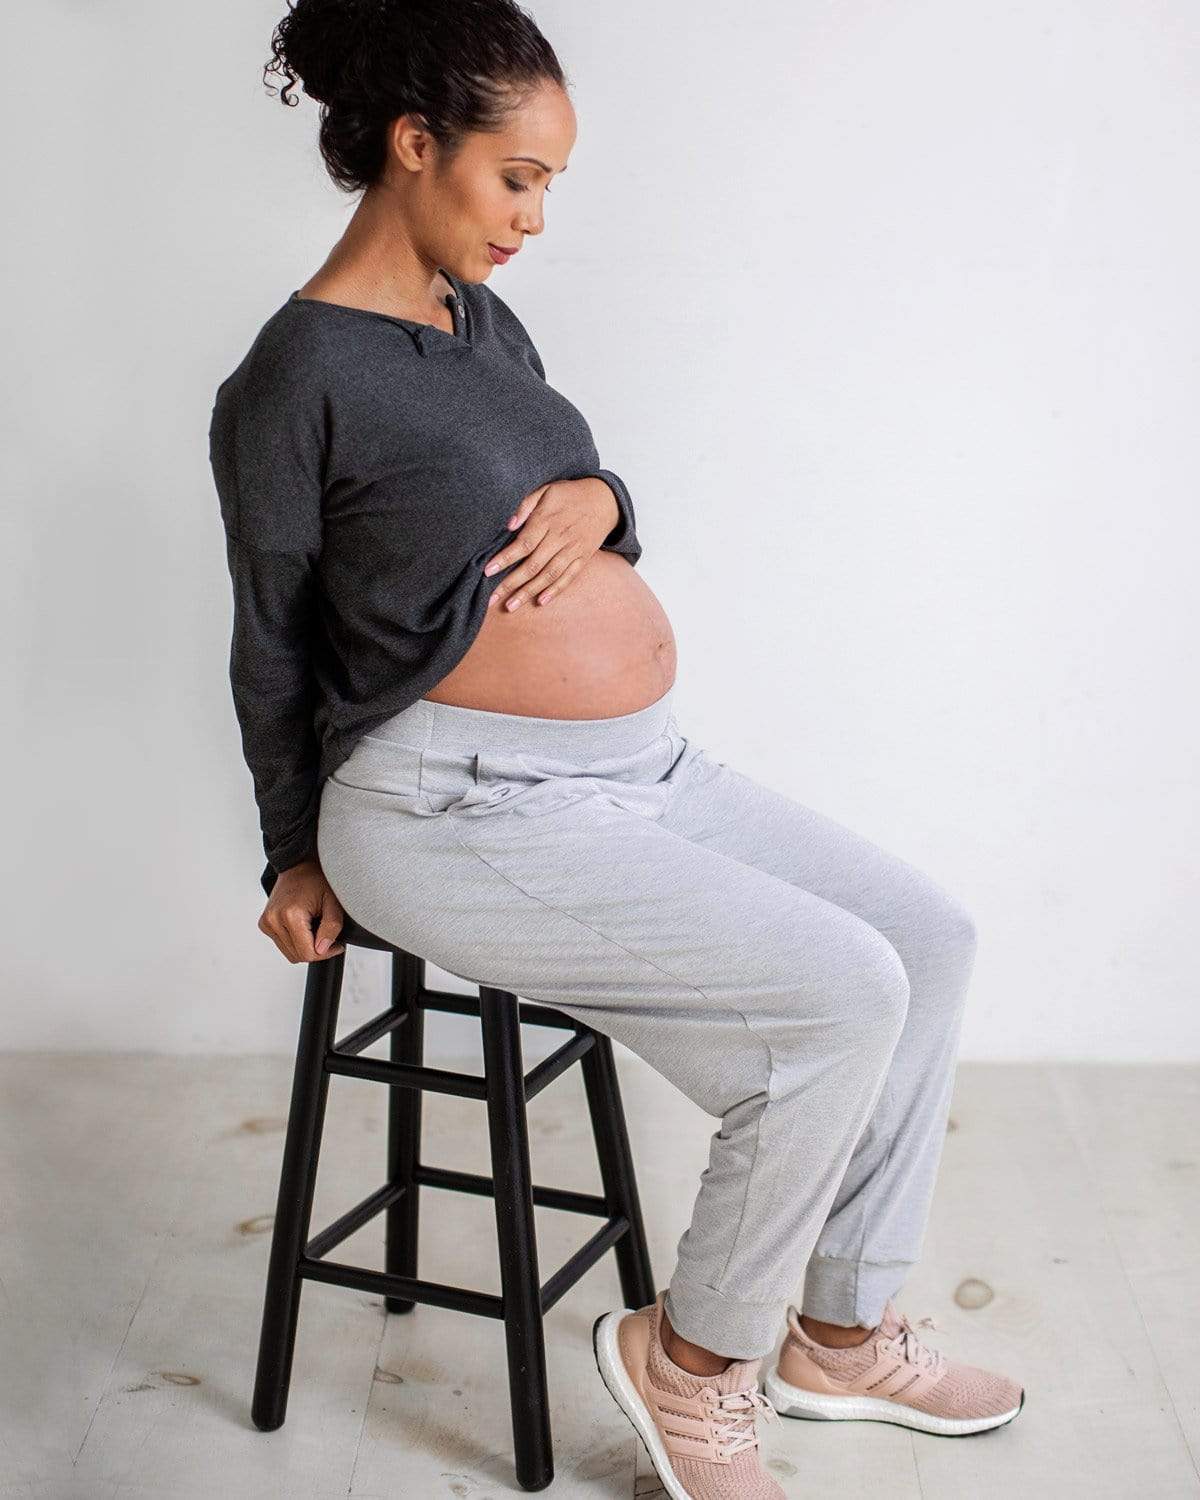 How To Keep Maternity Pants From Falling Down